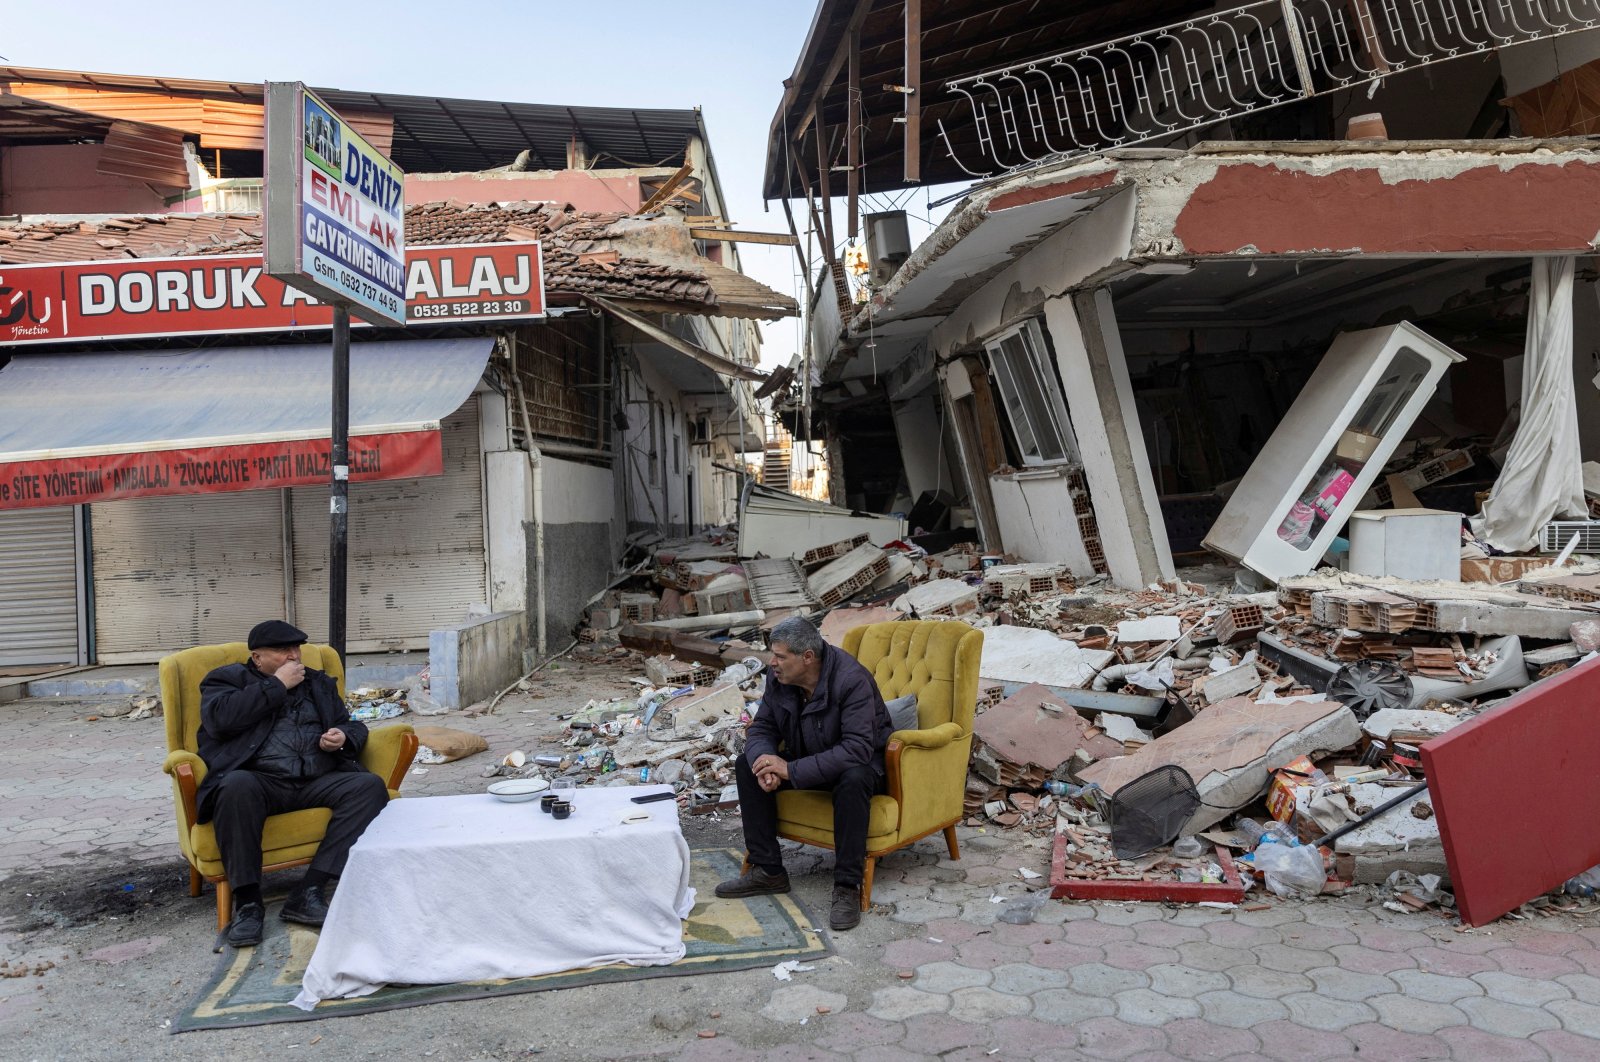 Men sit and talk in front of destroyed properties in the aftermath of the deadly earthquake in Antakya, Hatay province, Türkiye, Feb. 20, 2023. (Reuters Photo)